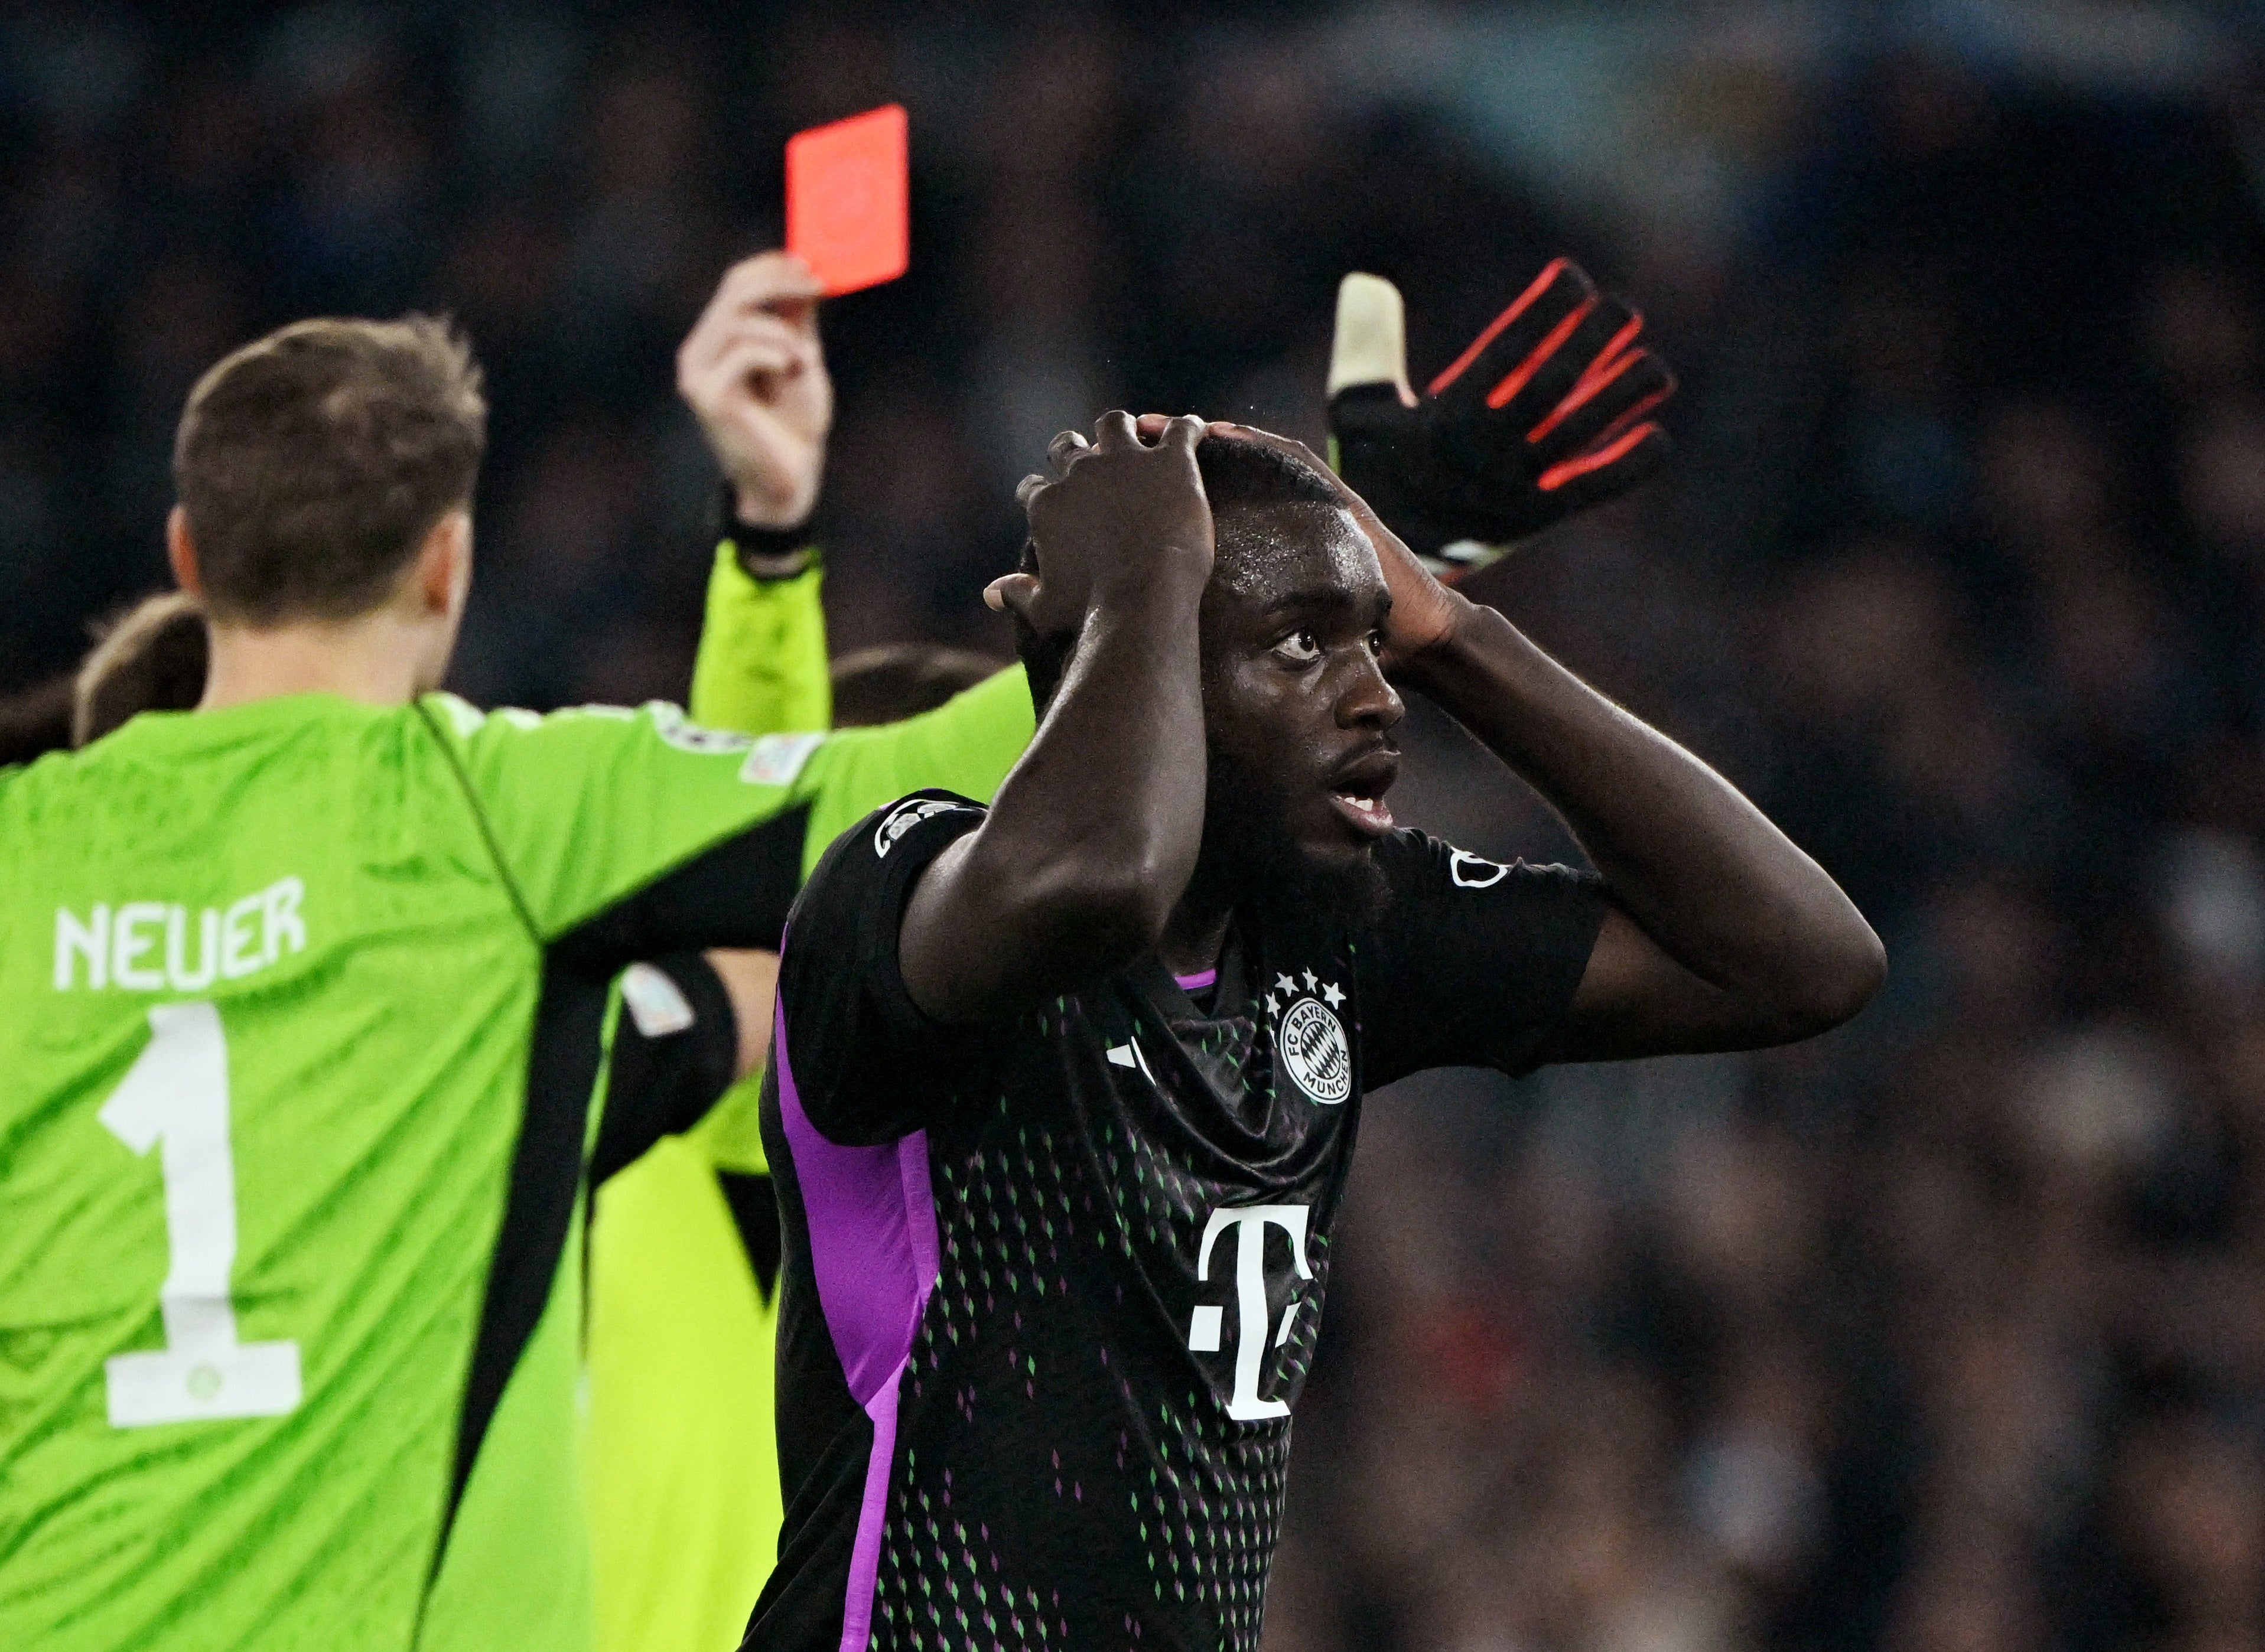 Dayot Upamecano was racially abused on social media after Bayern’s loss to Lazio